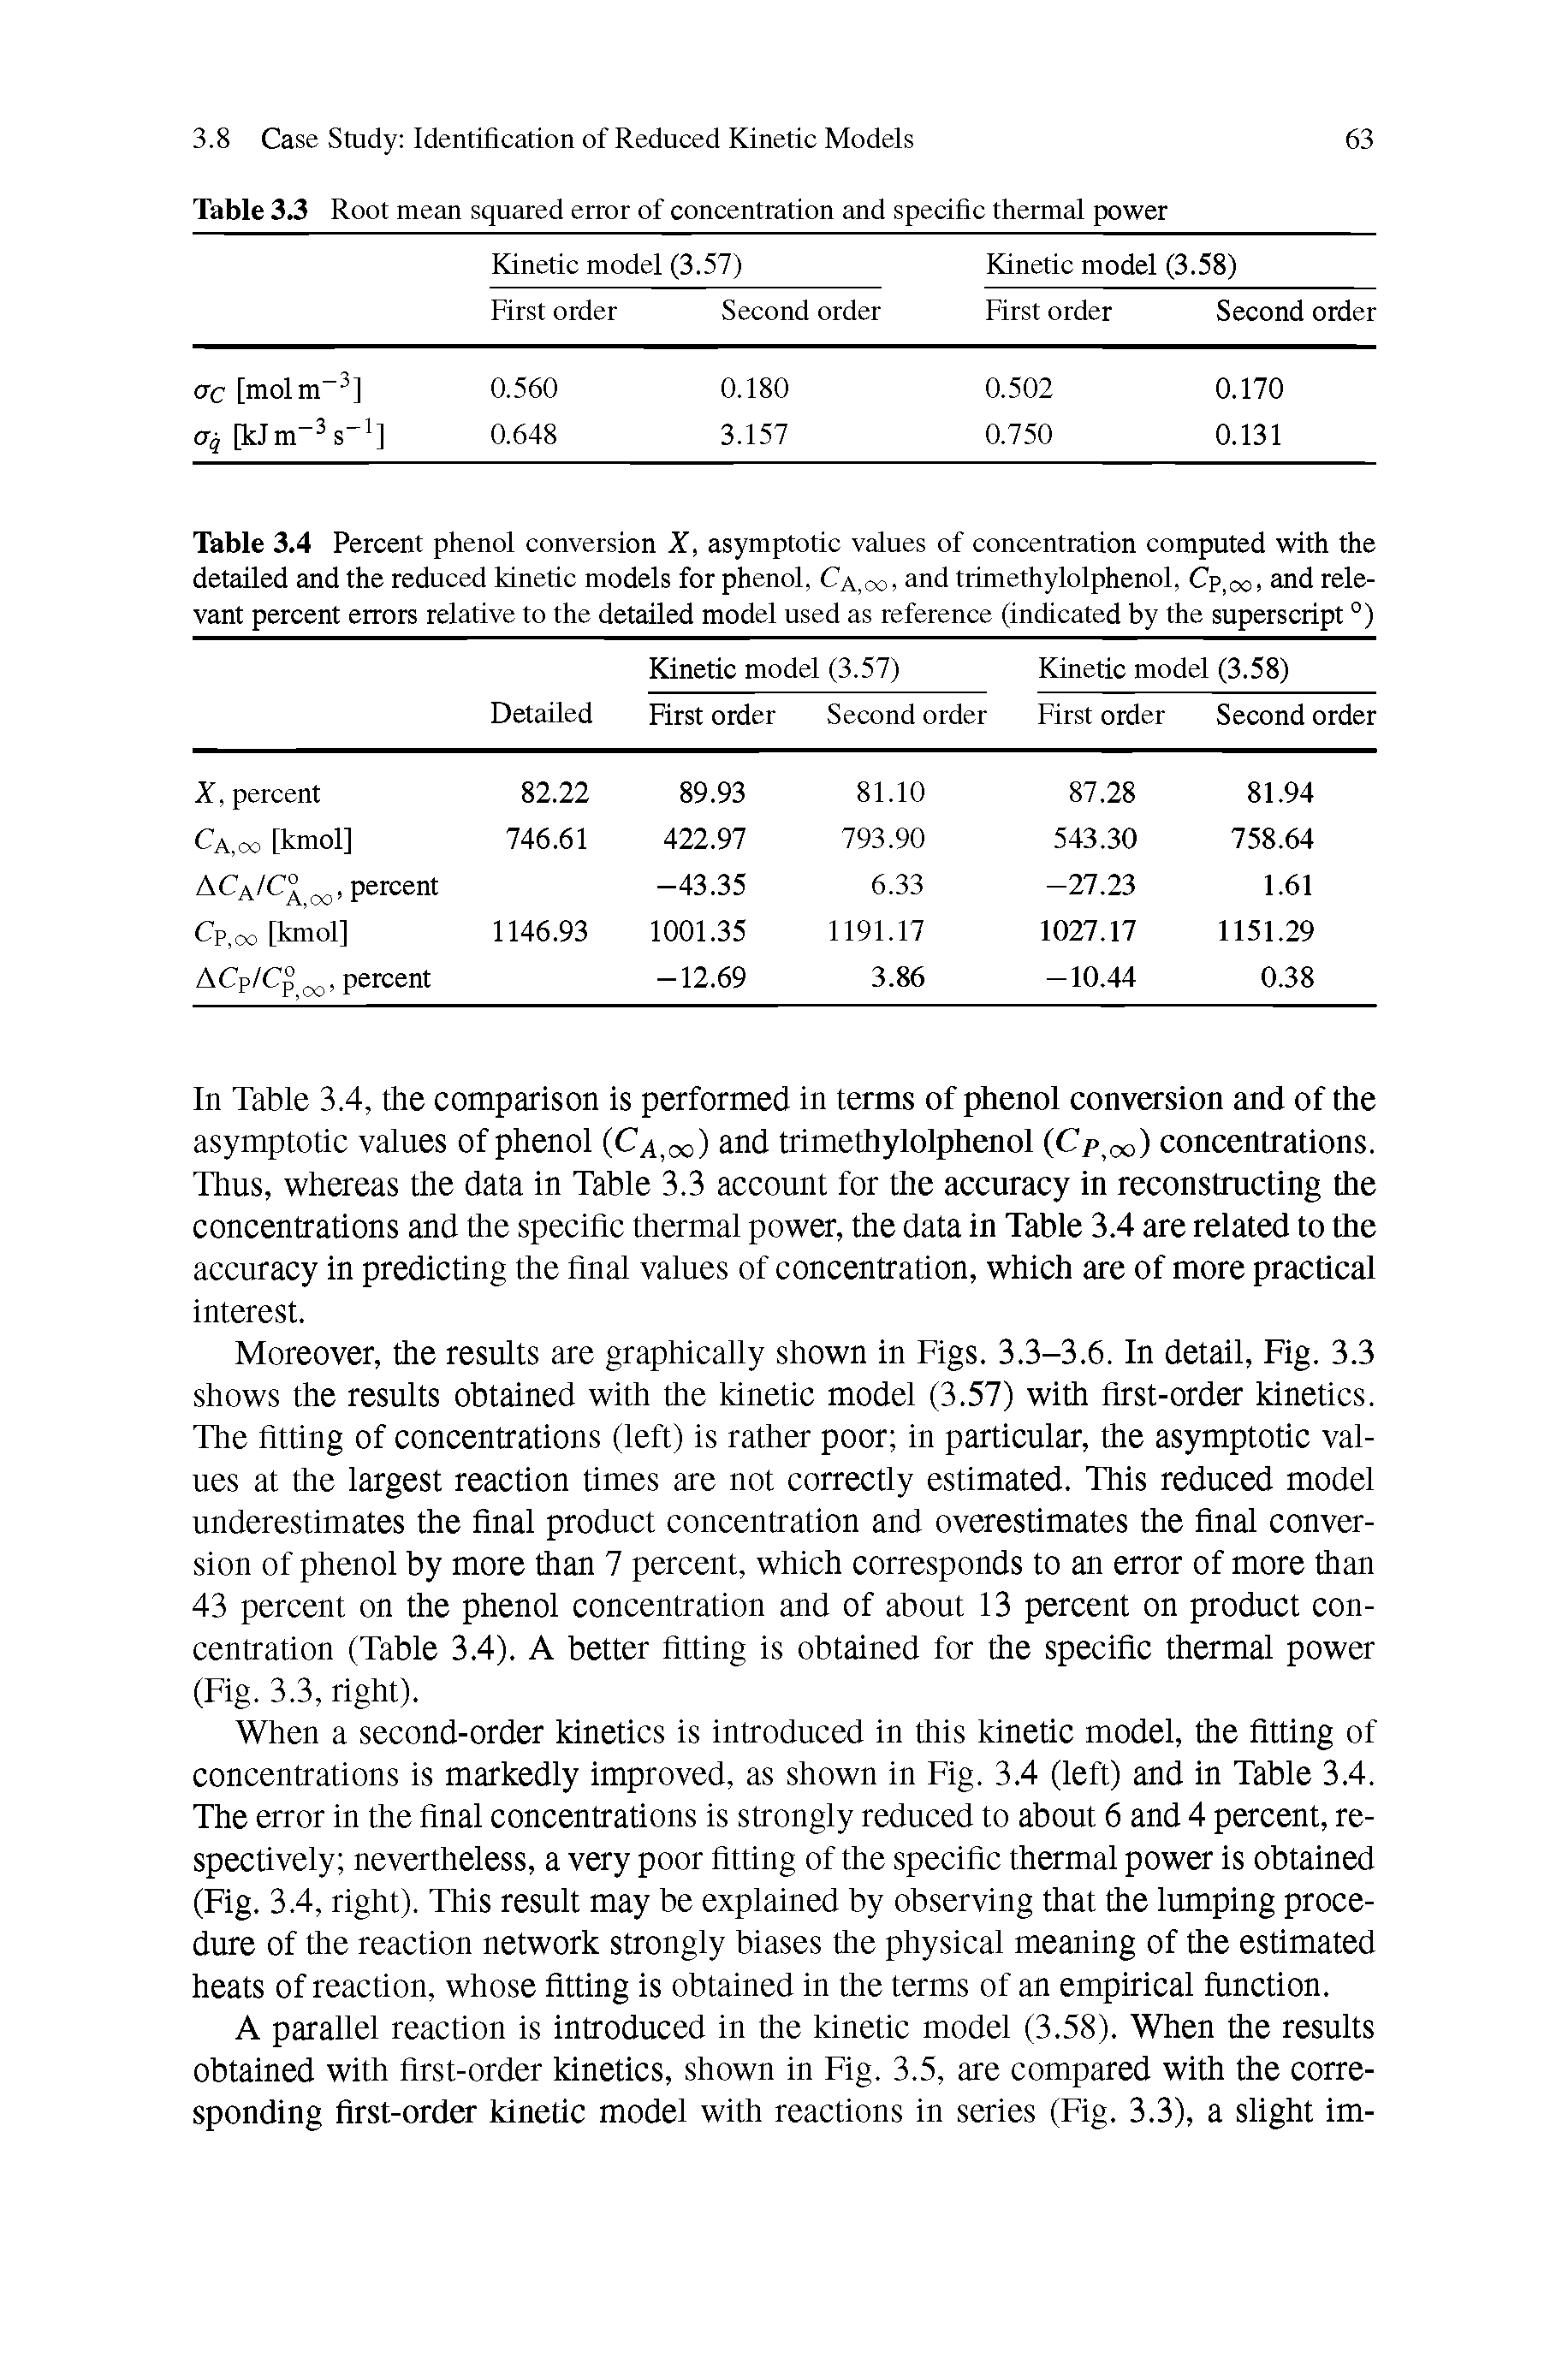 Table 3.4 Percent phenol conversion X, asymptotic values of concentration computed with the detailed and the reduced kinetic models for phenol, Ca.co, and trimethylolphenol, Cpi0o> and relevant percent errors relative to the detailed model used as reference (indicated by the superscript °)...